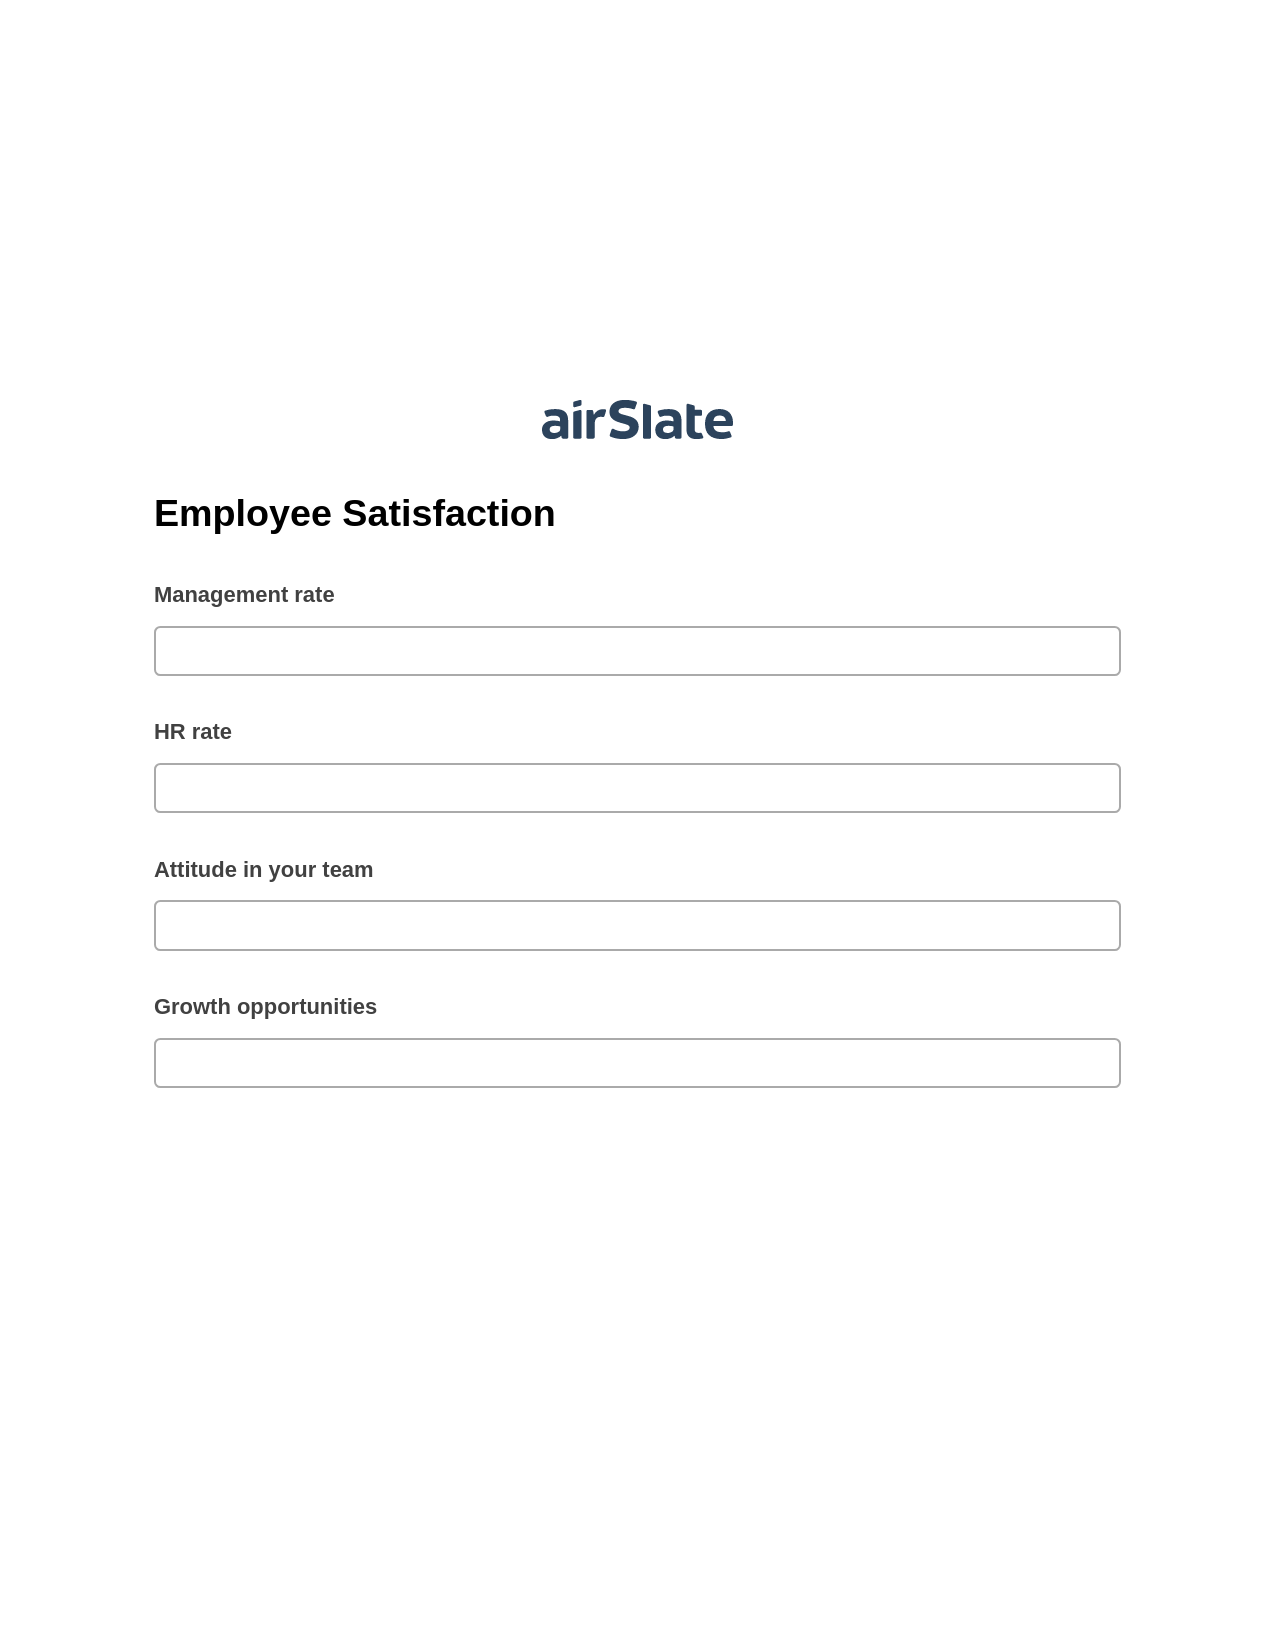 Employee Satisfaction Pre-fill from CSV File Bot, Slack Notification Bot, Post-finish Document Bot